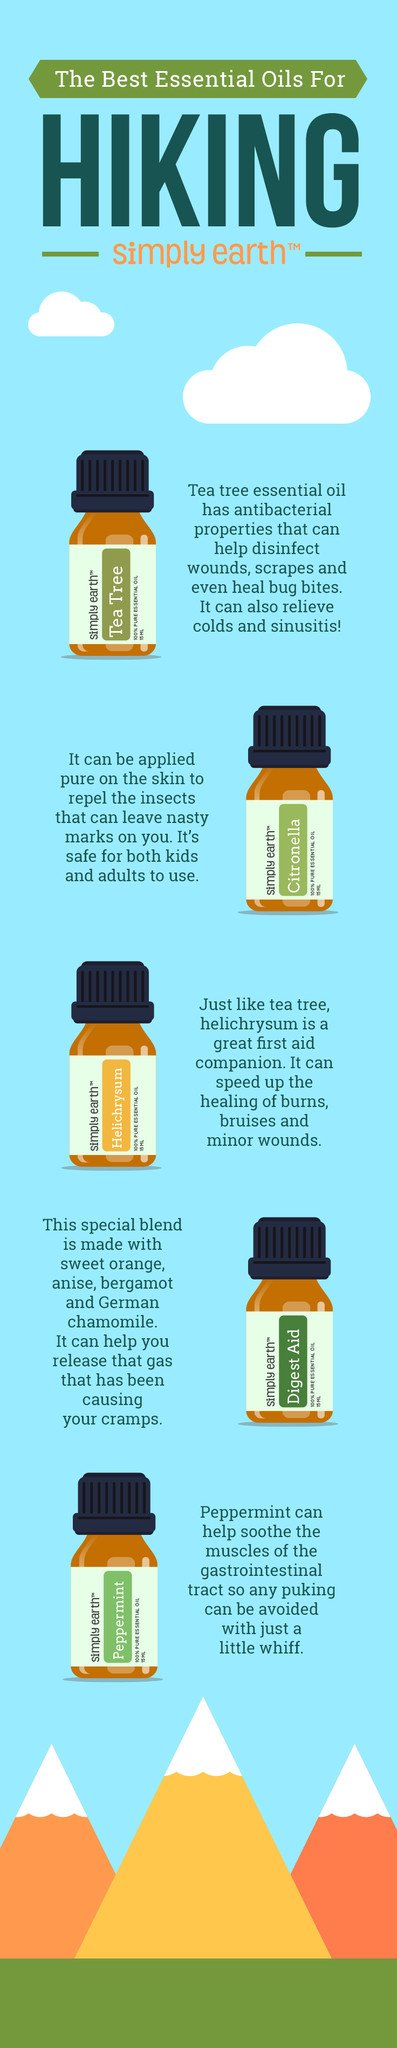 The Best Essential Oils For Hiking